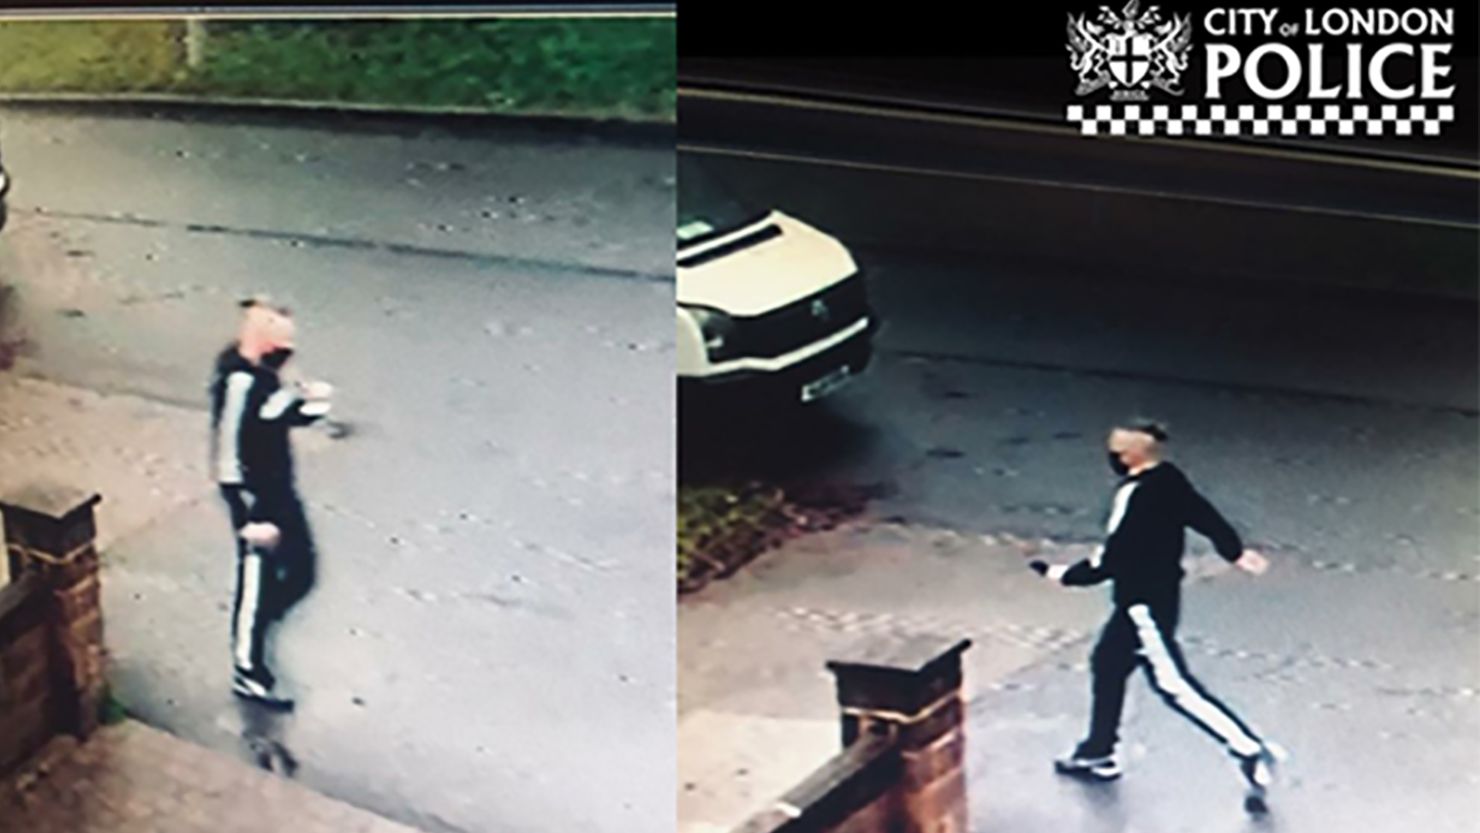 Police in London released these CCTV images in an appeal to the public.